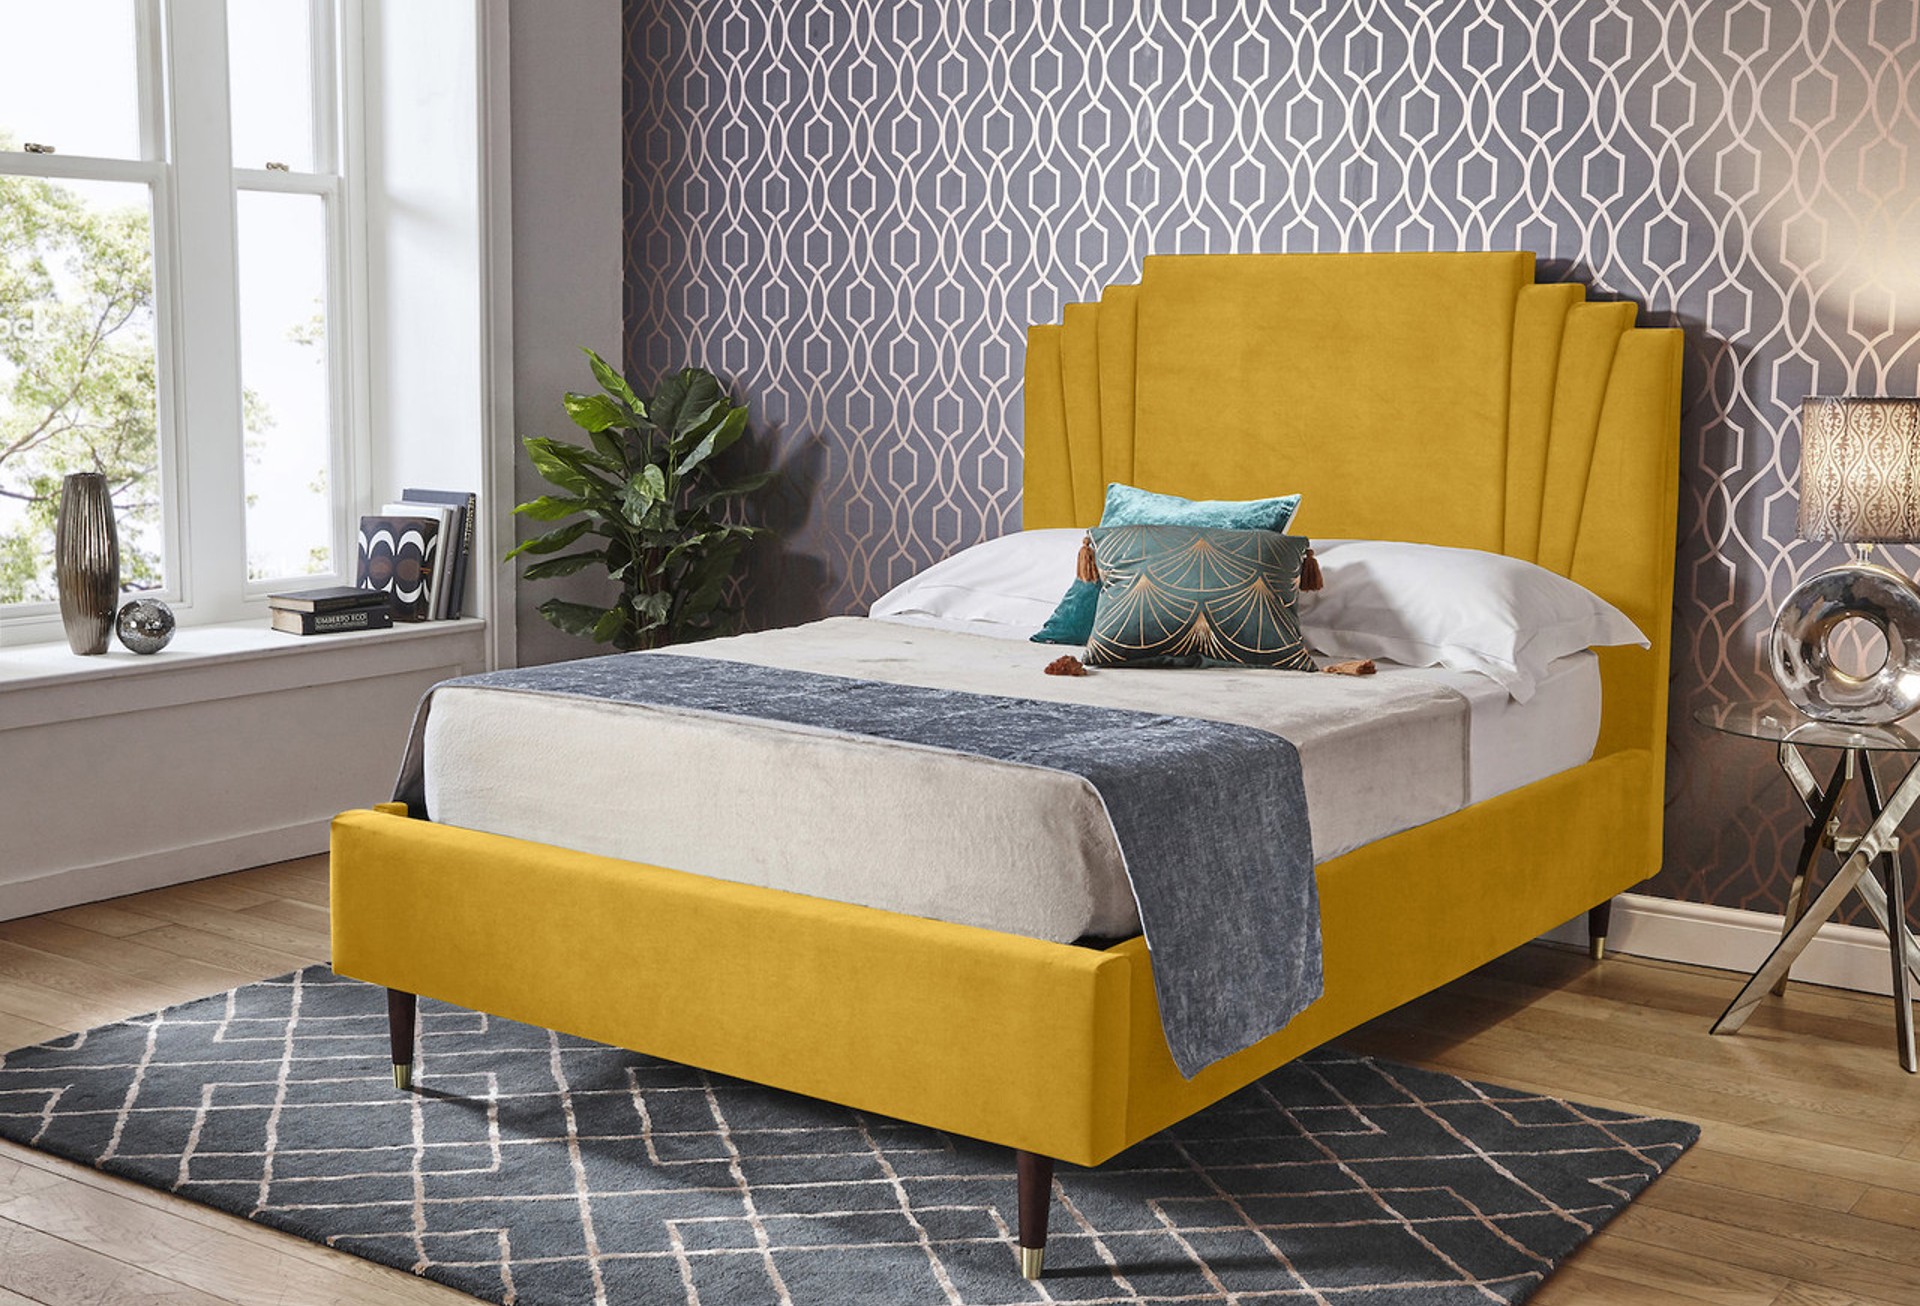 Fitzgerald Upholstered ottoman bed in mustard yellow with a maximalist printed wallpaper as the backdrop